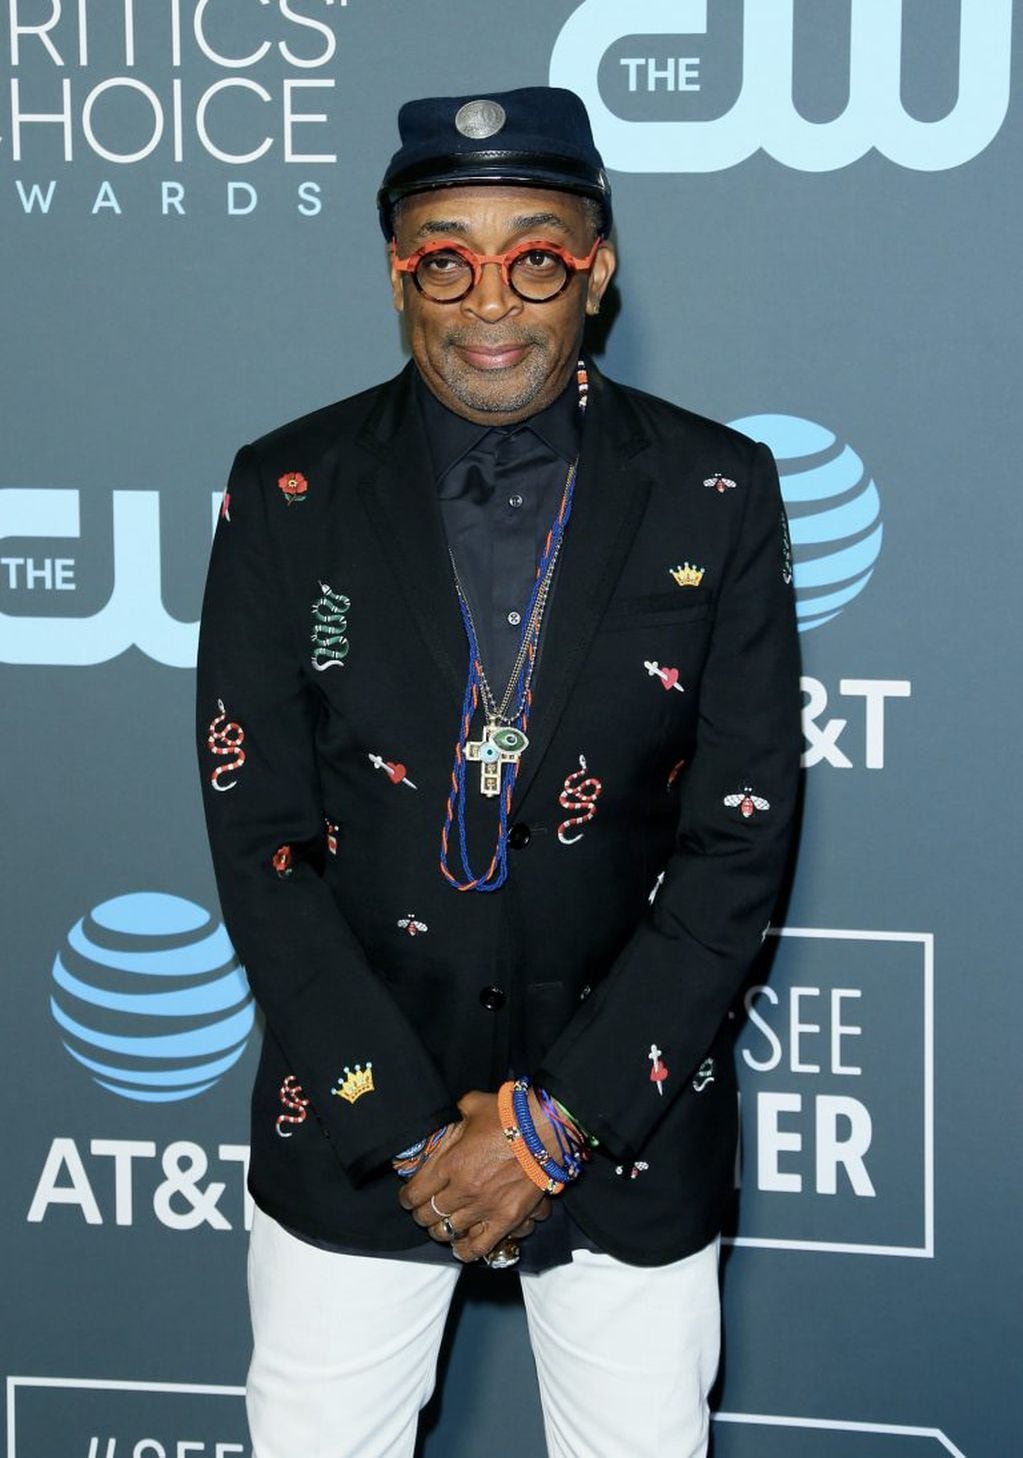 Best director nominee for "BlacKkKlansman" Spike Lee arrives for the 24th Critics' Choice Awards at Barker Hangar Santa Monica airport on January 13, 2019 in Santa Monica, California. (Photo by Jean-Baptiste LACROIX / AFP)